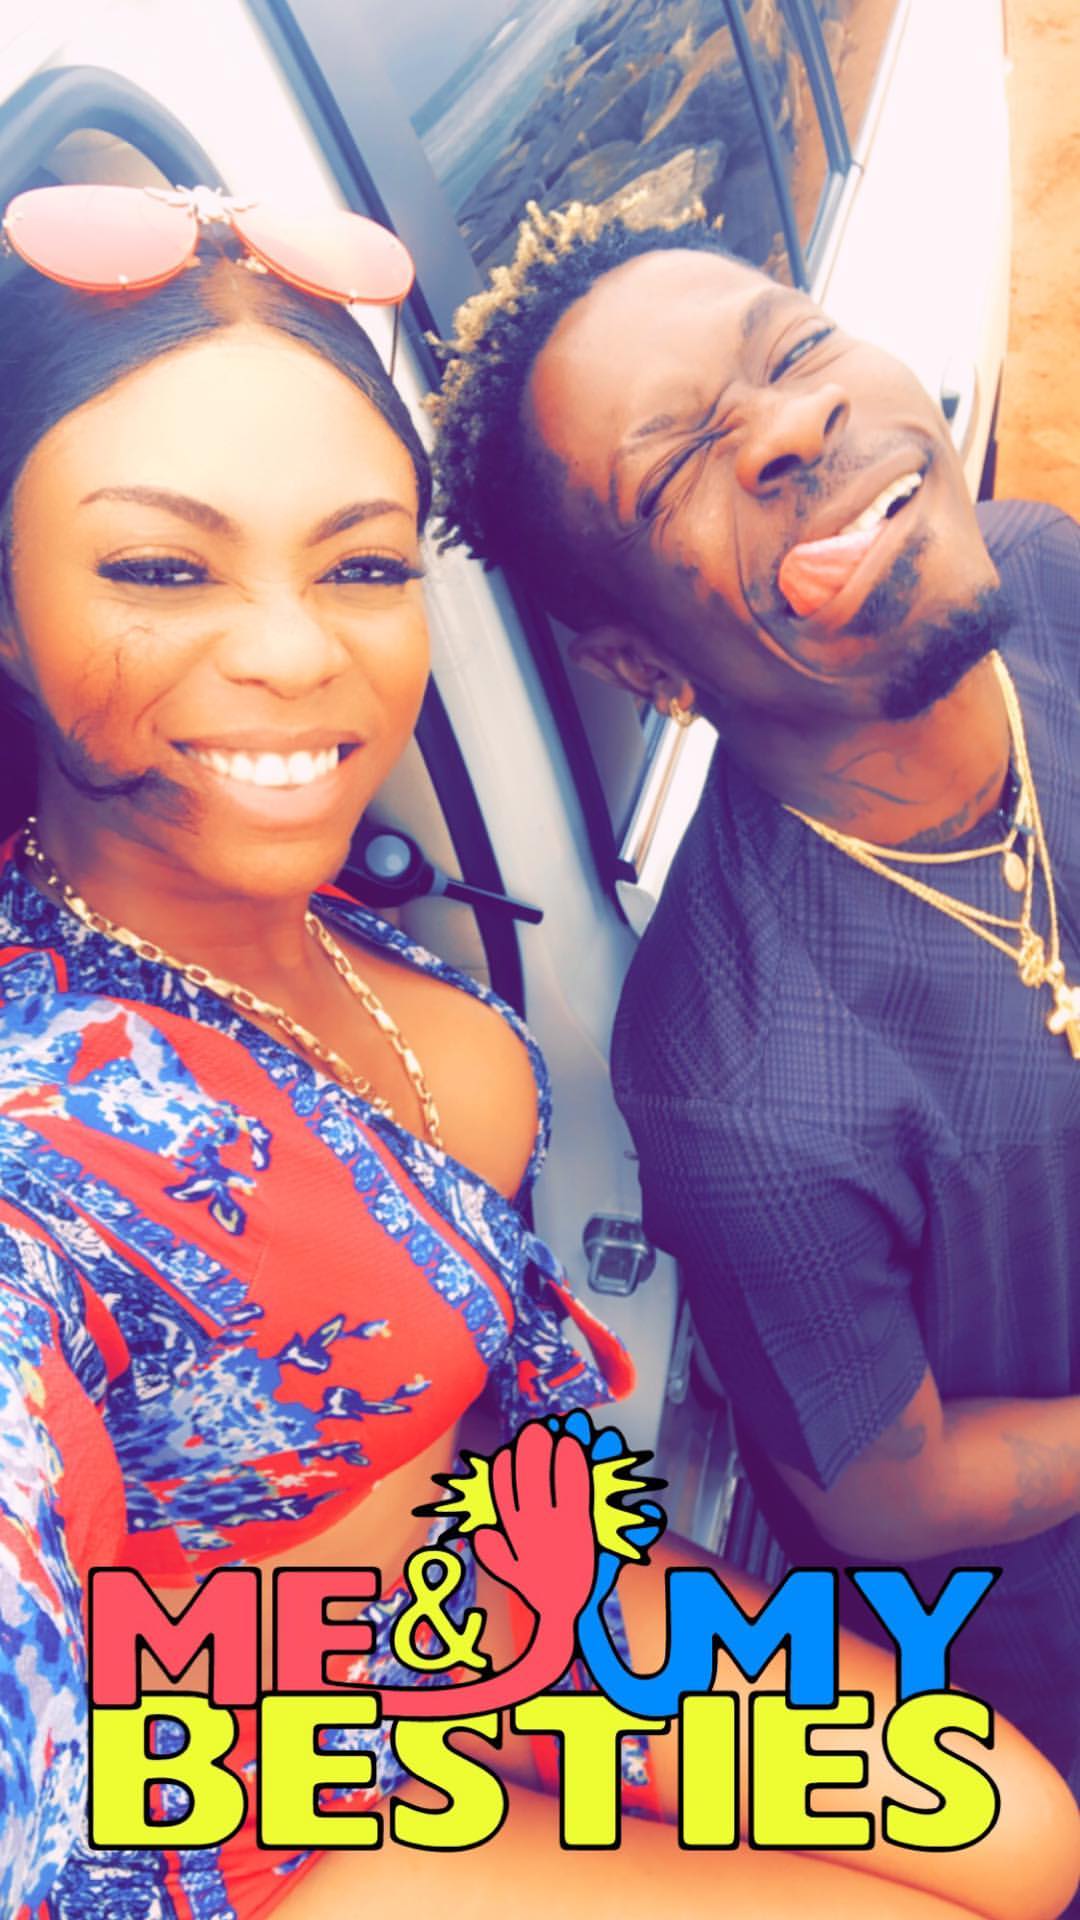 Shatta Wale And Michy Kiss As They Hit The Beach